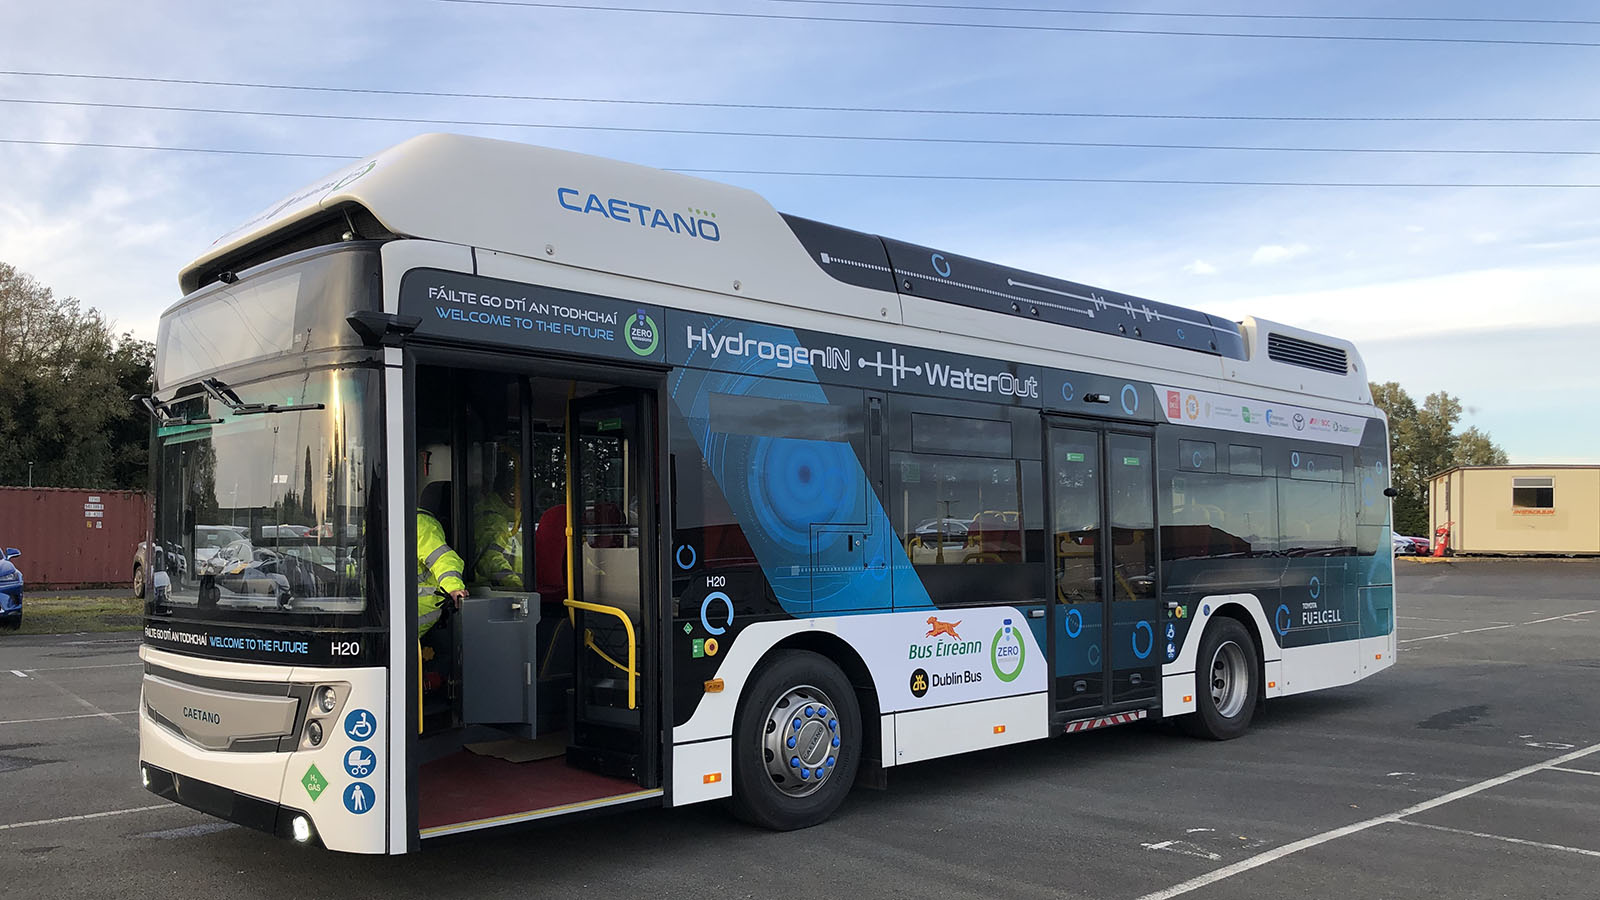 TOYOTA HYDROGEN FUEL CELL POWERED BUS